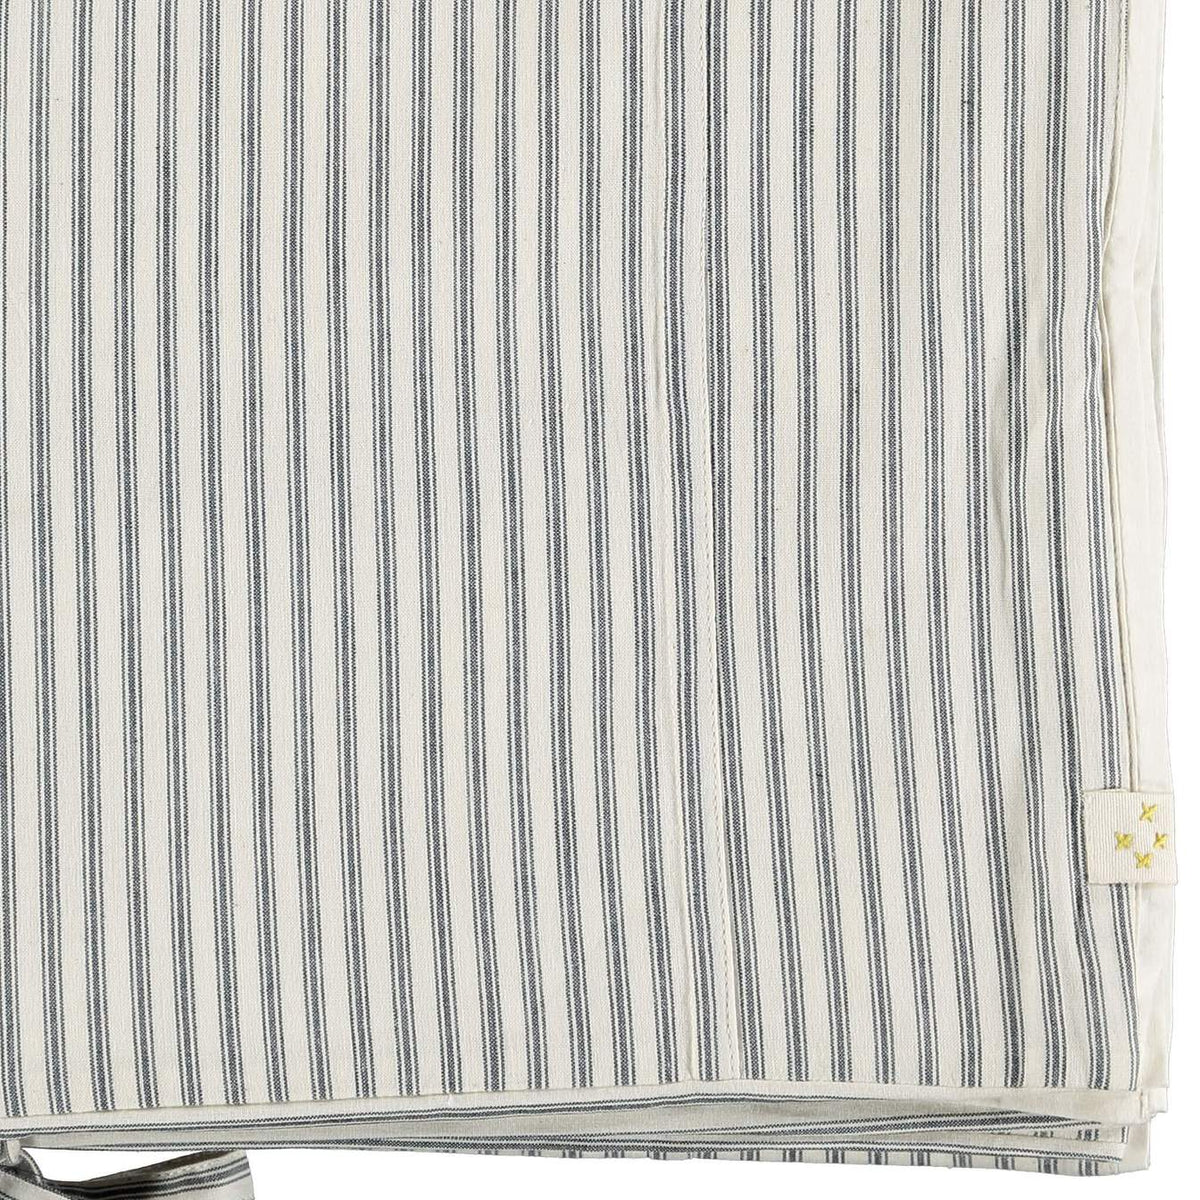 Fitted Crib Sheet | Charcoal/Ivory Ticking Stripe by Camomile London - Maude Kids Decor